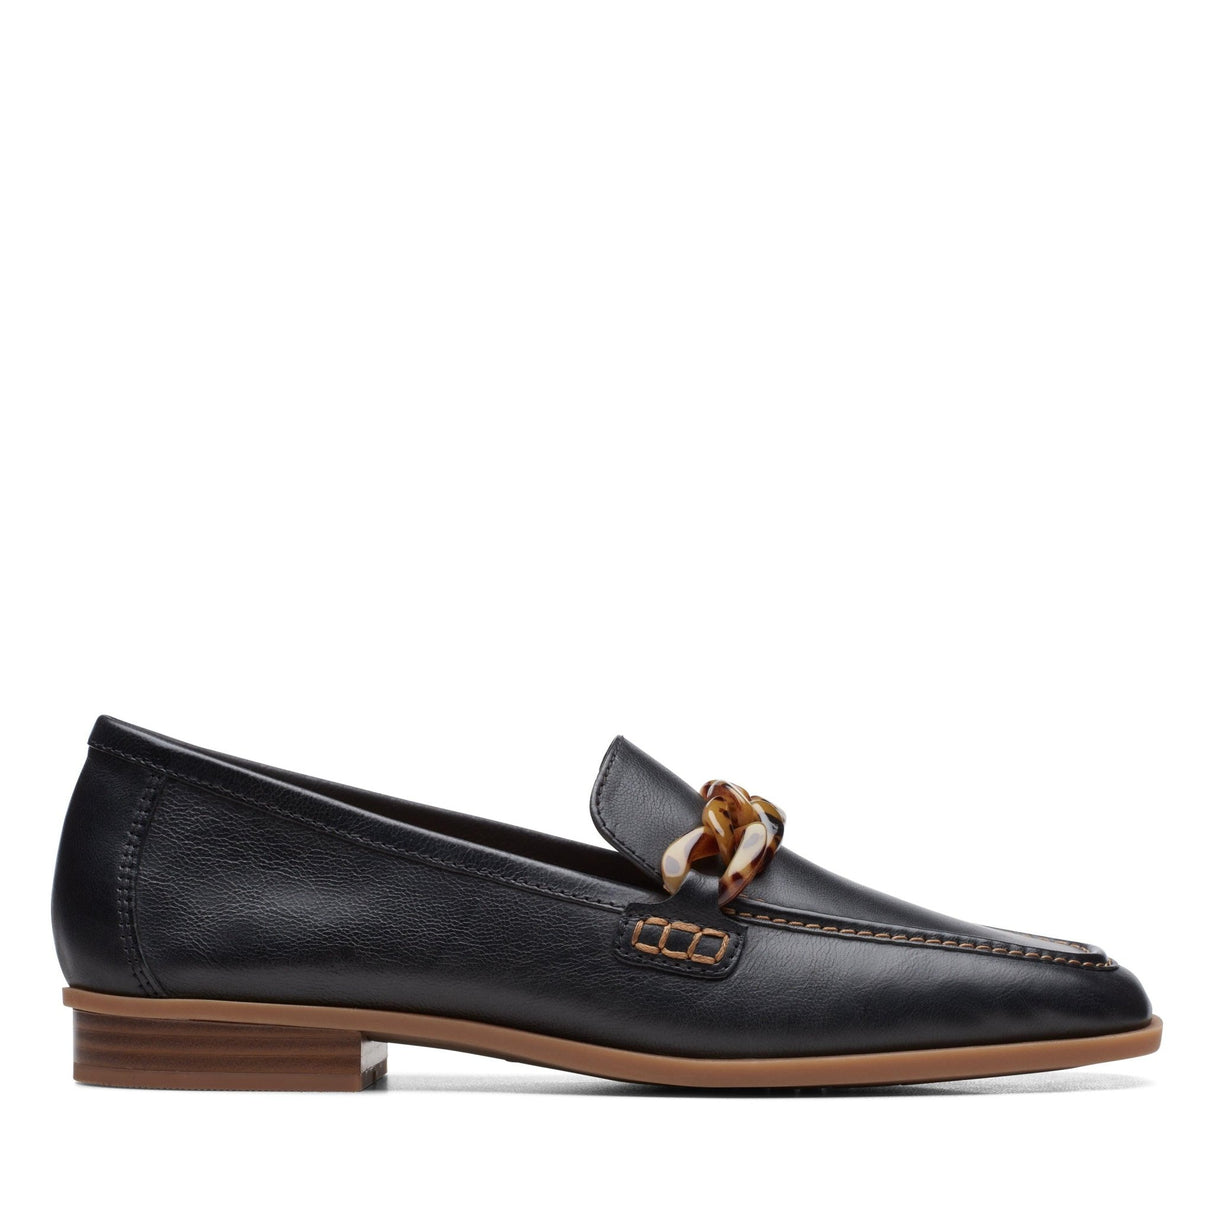 Clarks Women's Sarafyna Iris Loafer - A&M Clothing & Shoes